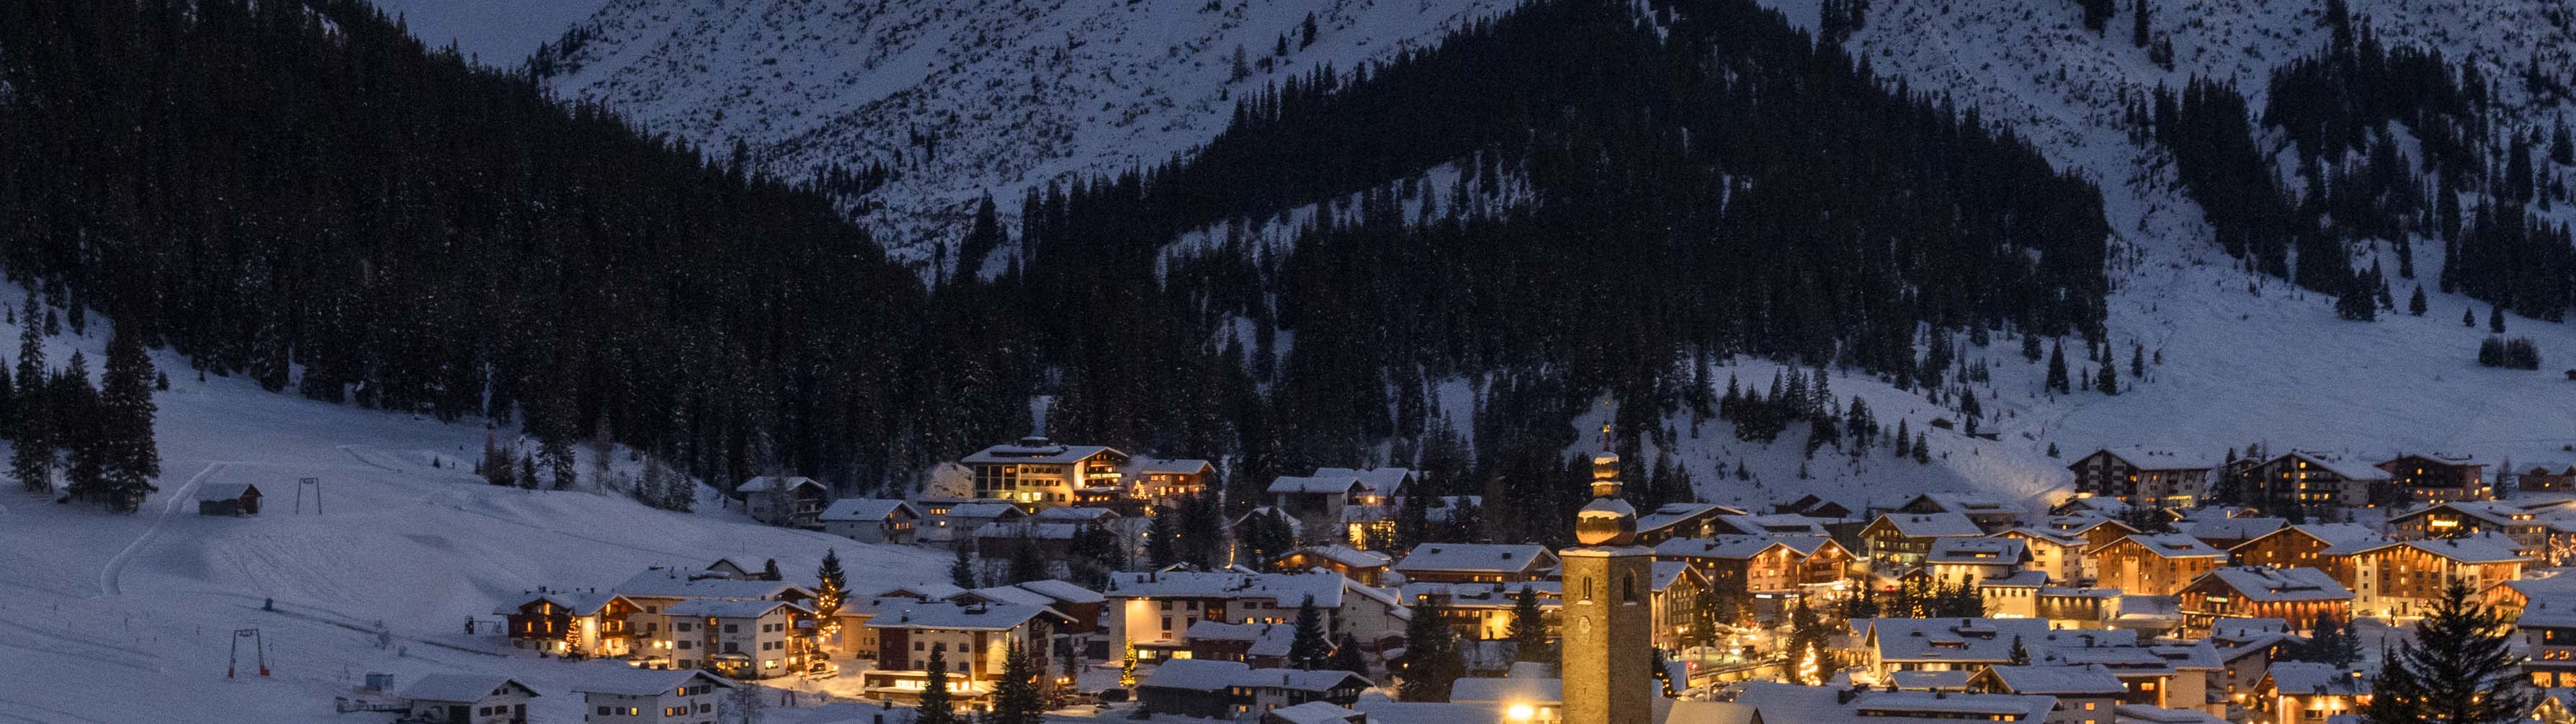 The beautiful village of Lech am Arlberg lights up the cold night sky, surrounded by snow-packed slopes.